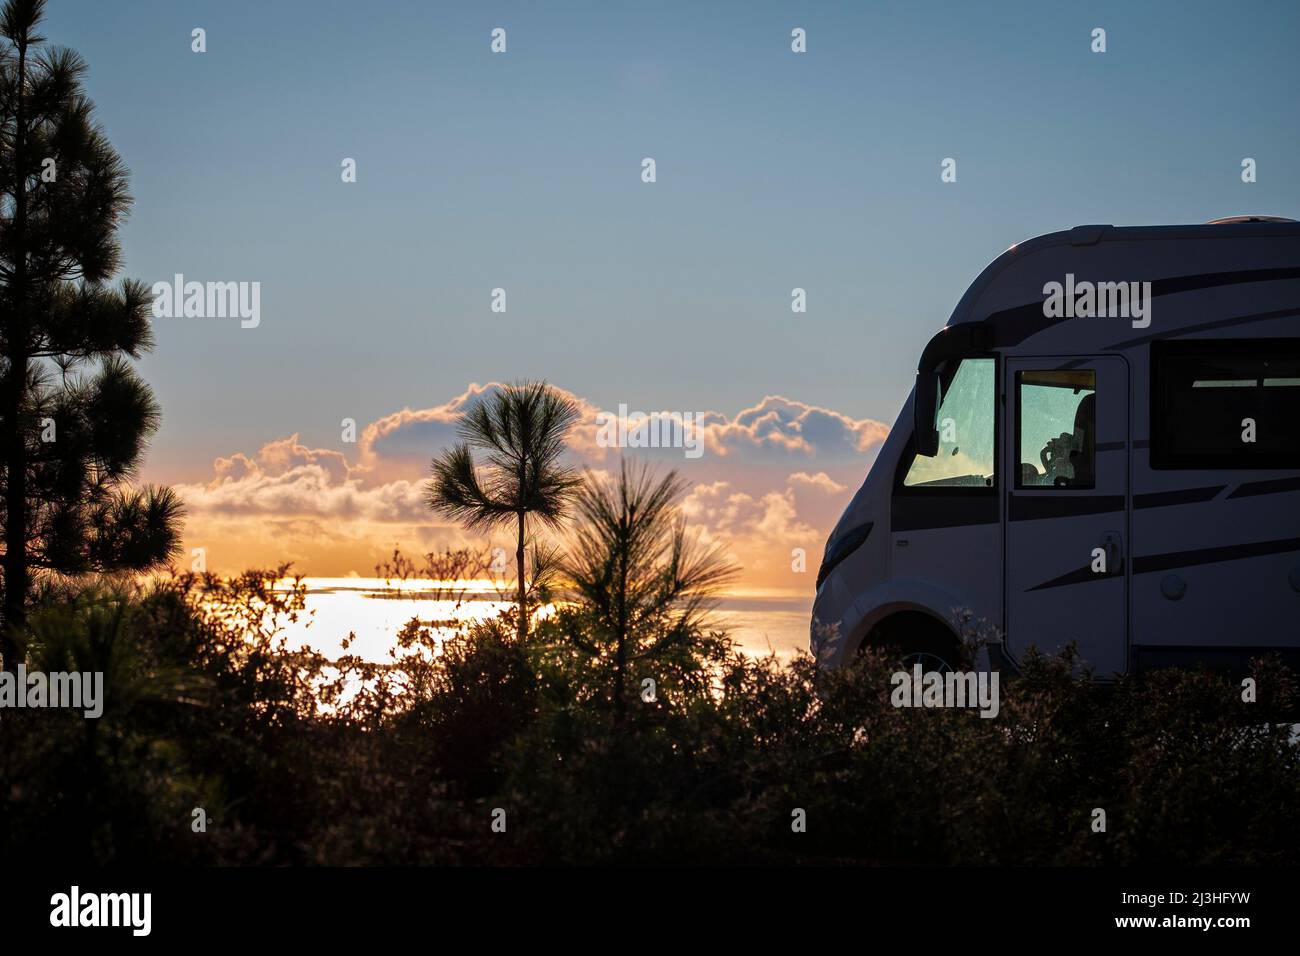 Travel people lifestyle and nomadic life with white camper van motorhome and beautiful colorful sunset on the ocean in background. Travel and enjoy freedom and nature with rv Stock Photo